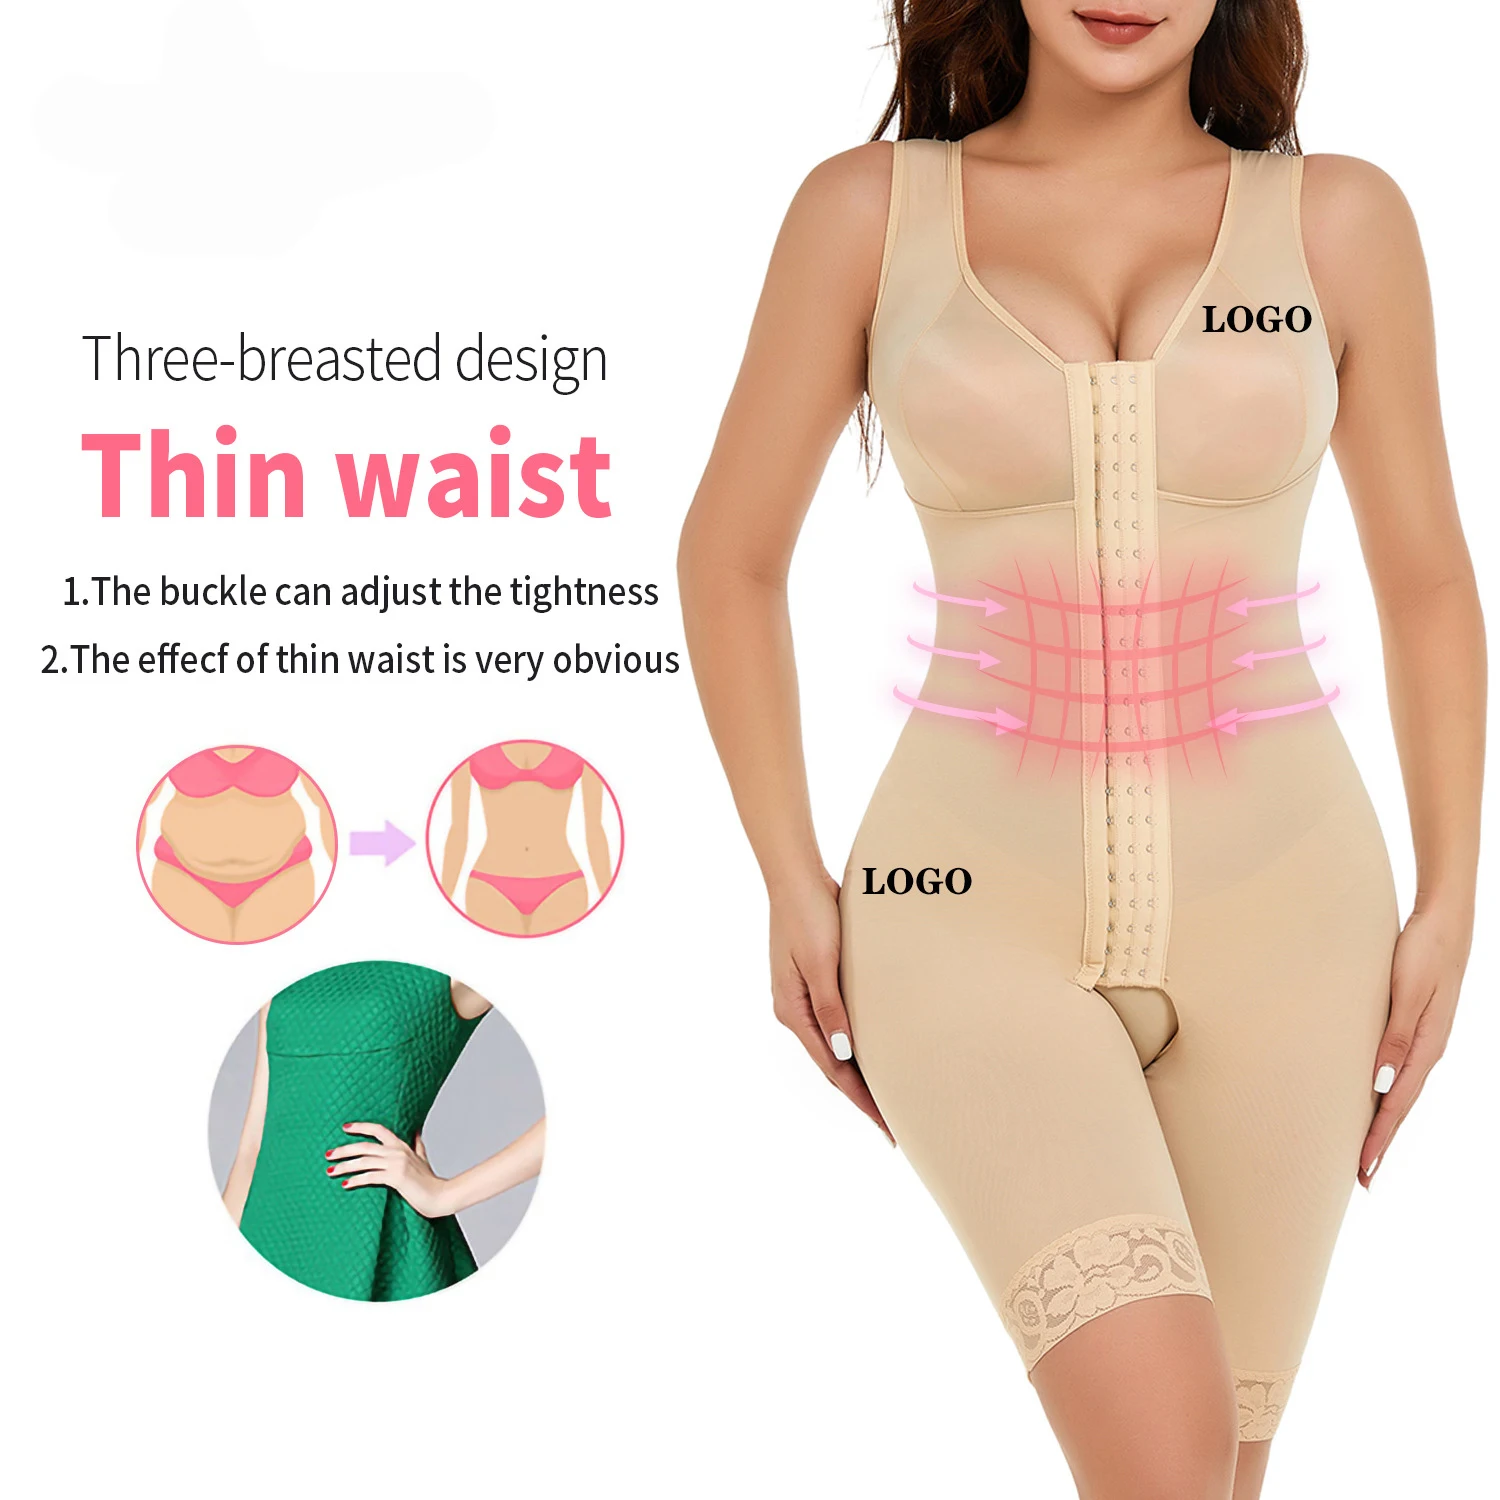 

Full Body Tummy Control Women High Compression Crotchless Thigh Colombianas Post Surgery Fullbody a Faha Shapewear Jumpsuit, Black, nude